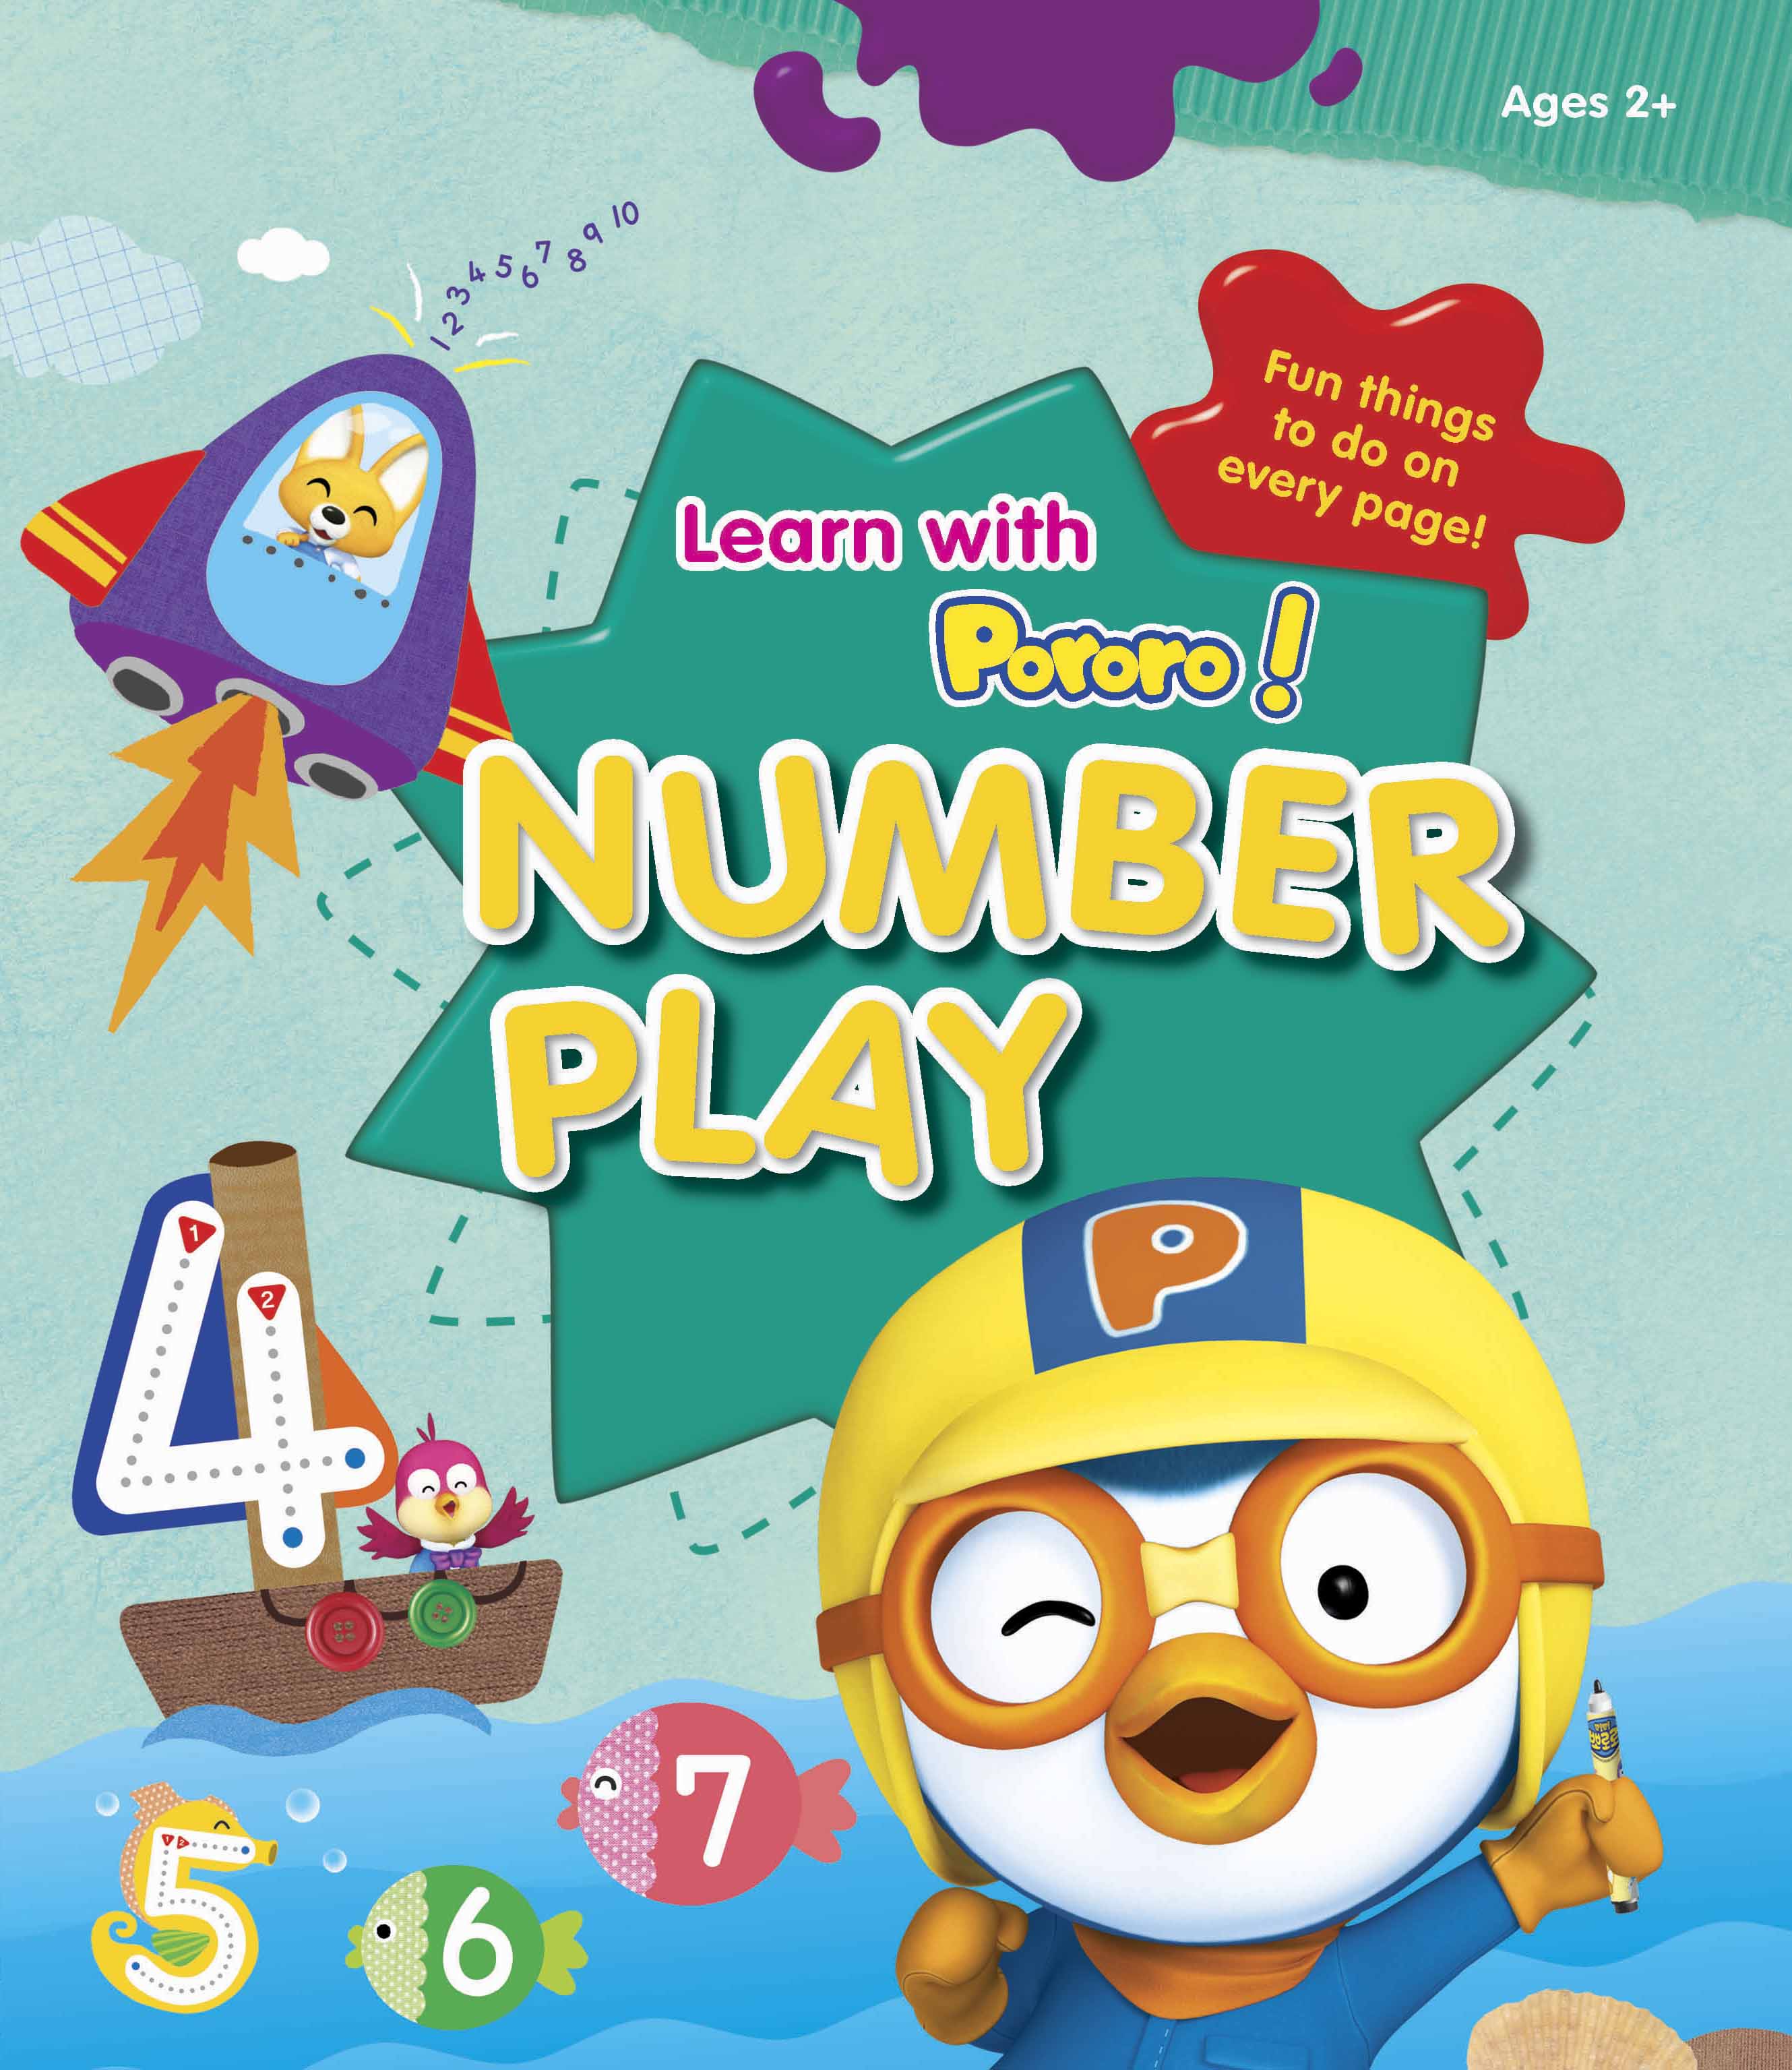 Learn with Pororo! Number Play